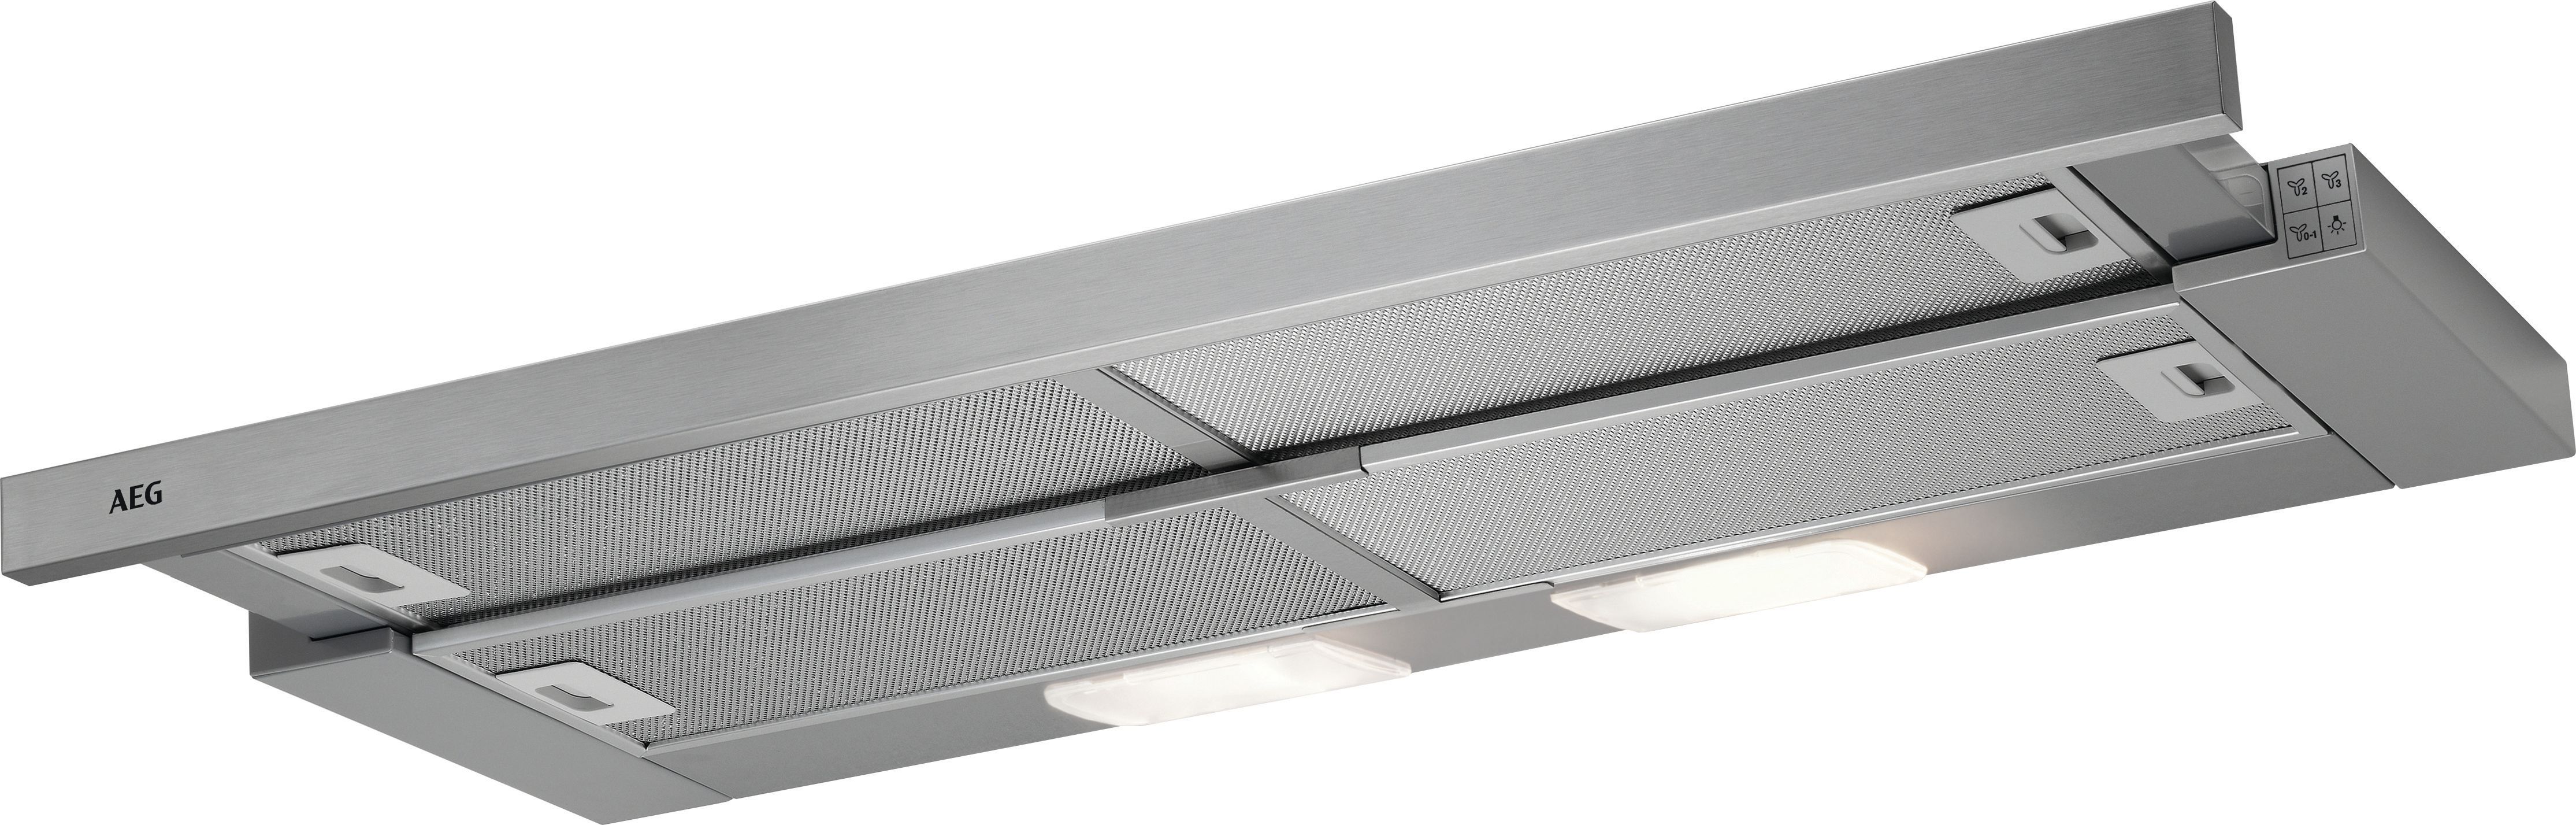 Image of AEG DPB3932S 90cm Pull-Out Hood - Stainless Steel